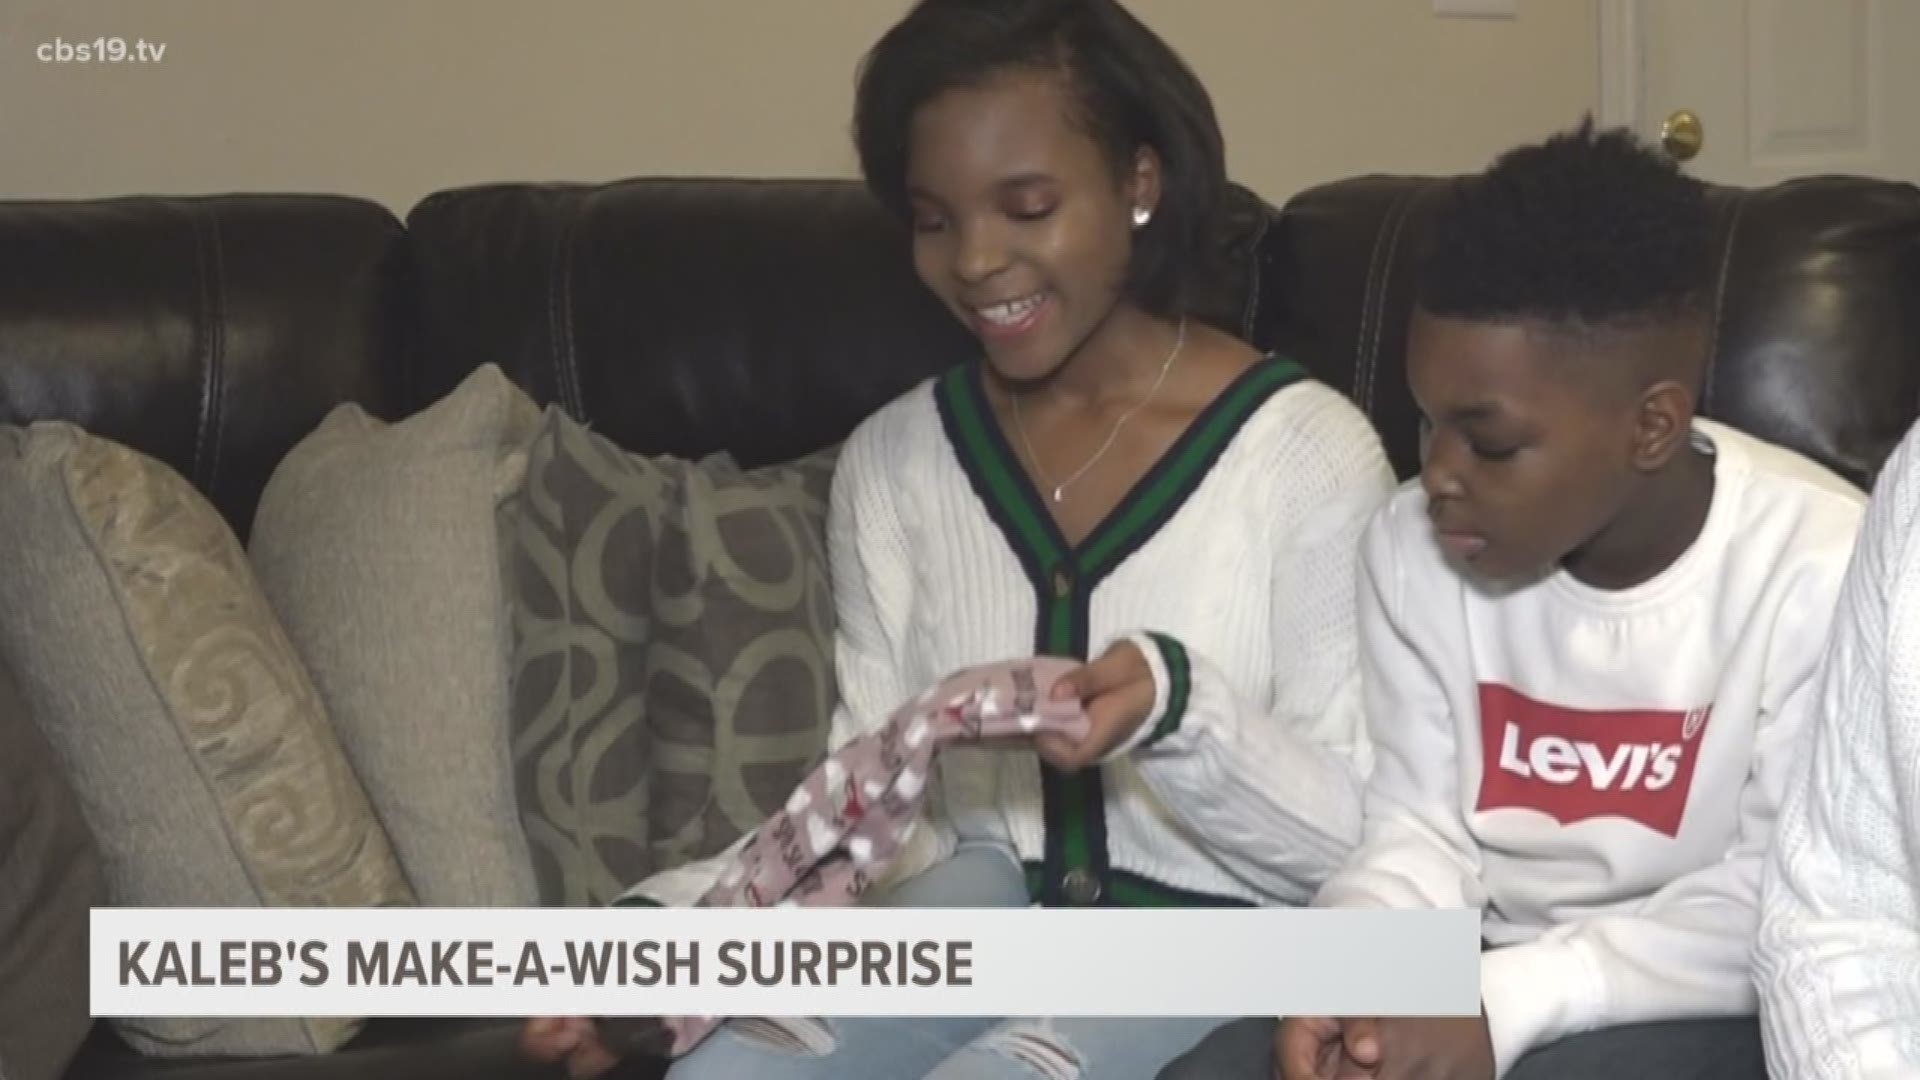 What they didn't know is Kaleb suffered from lymphoma but he never let that bring him down. 
on Friday make a wish surprised him with a trip to Disney!